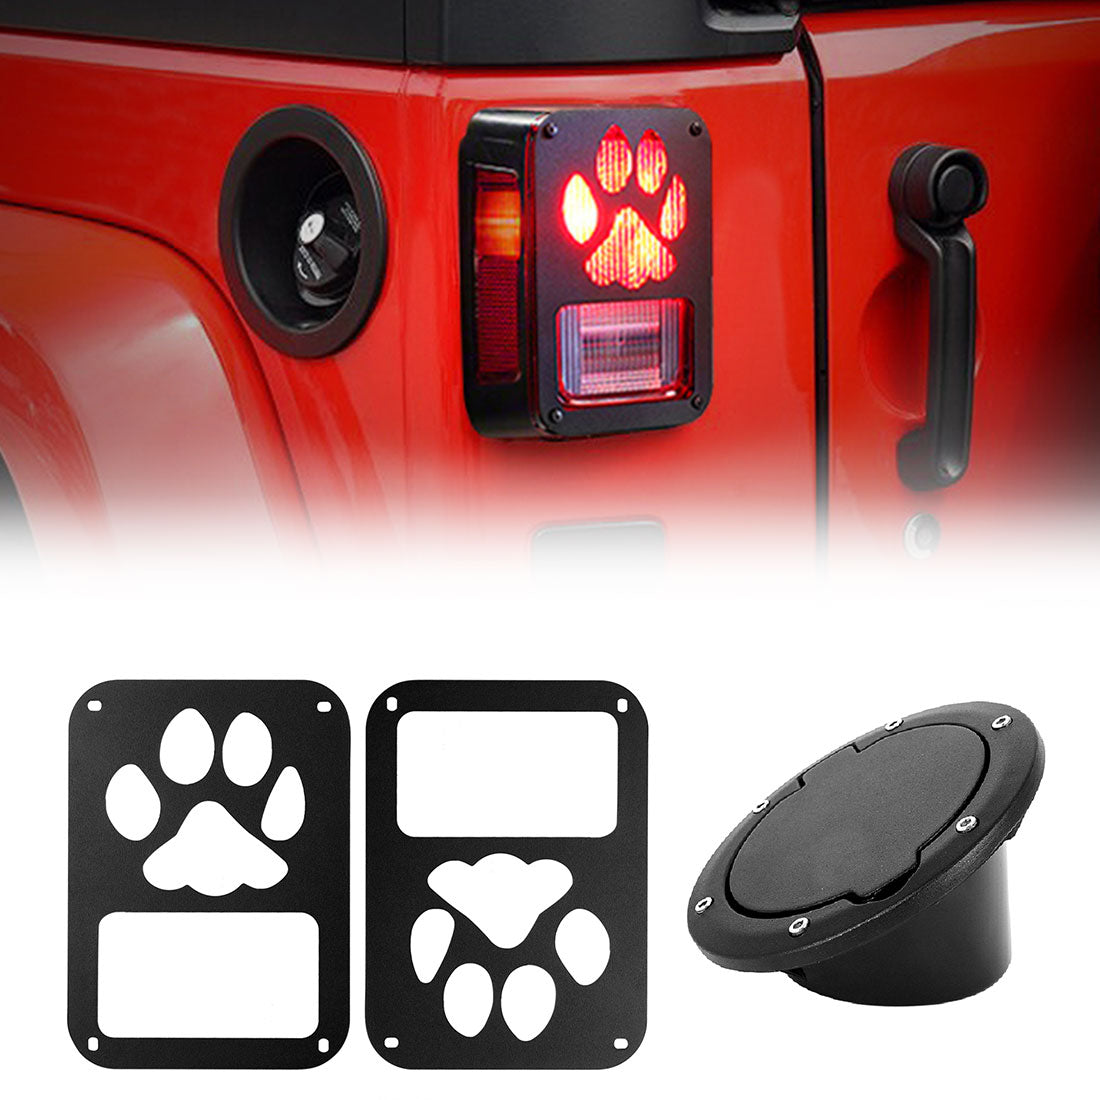 Dog Paw Tail Light Guards & Black Gas Fuel Tank Cover Combo for 07-18 Jeep Wrangler JK/JKU丨Amoffroad